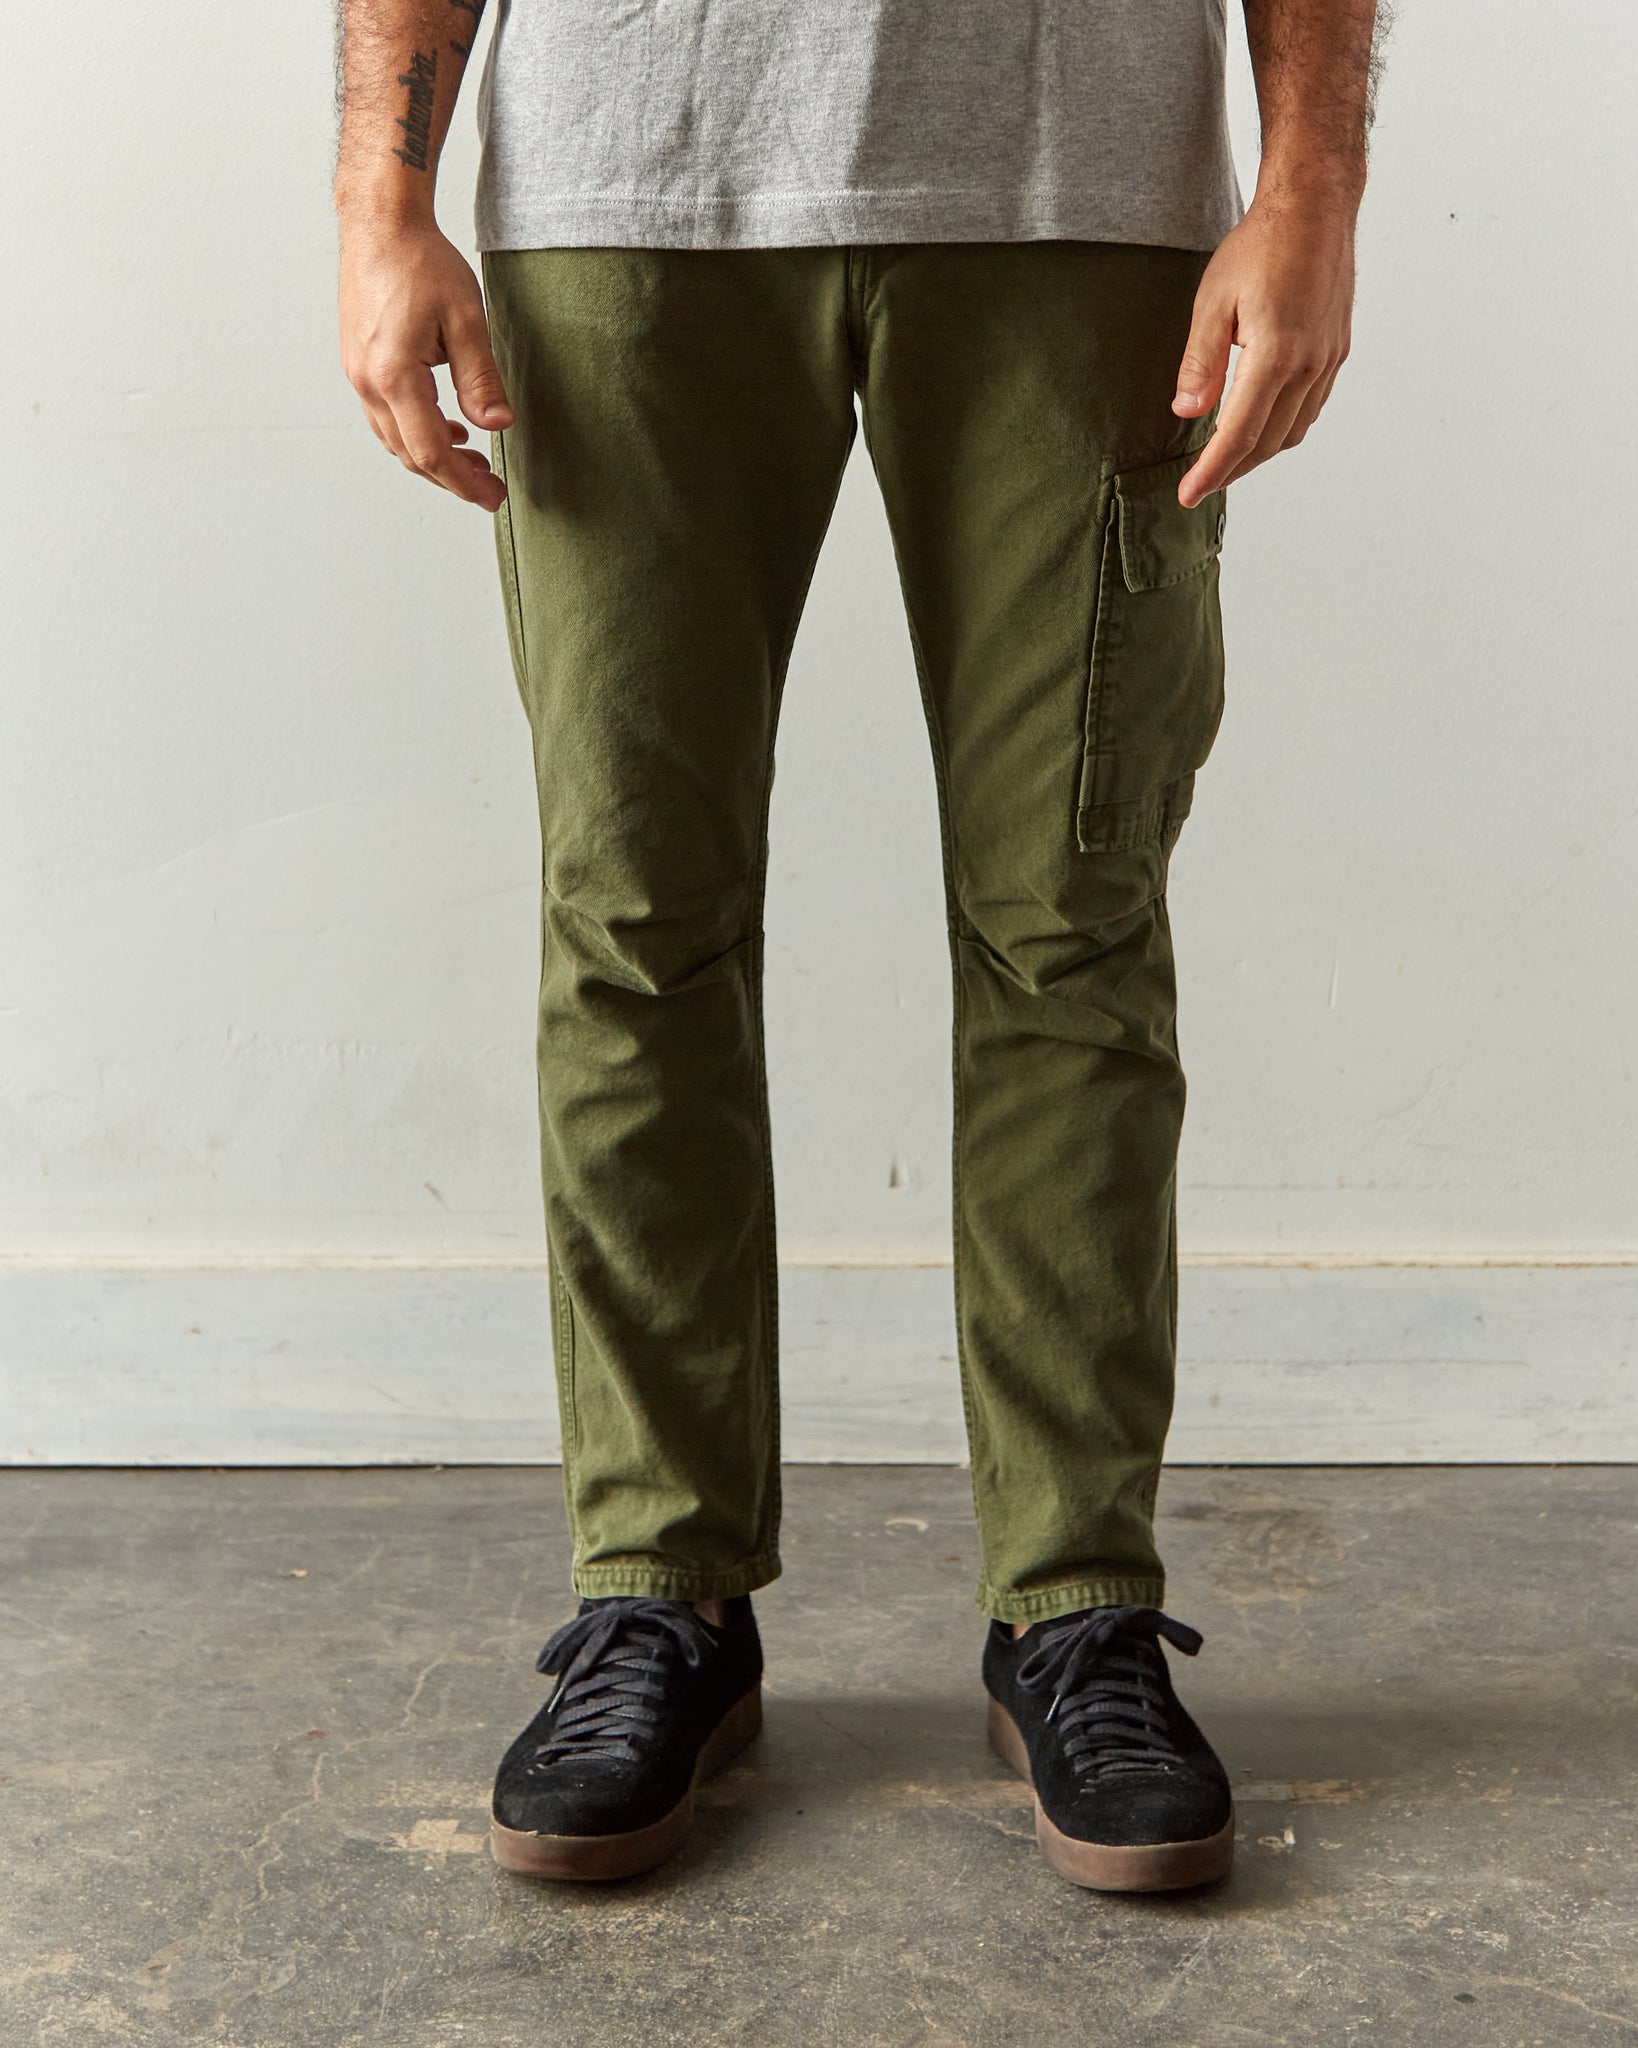 Colins Mens Karl Straight Fit Bege High Rise Leg Pants Men Khaki Trousers  Mens CL1006465 201125 From Dou02, $71.95 | DHgate.Com